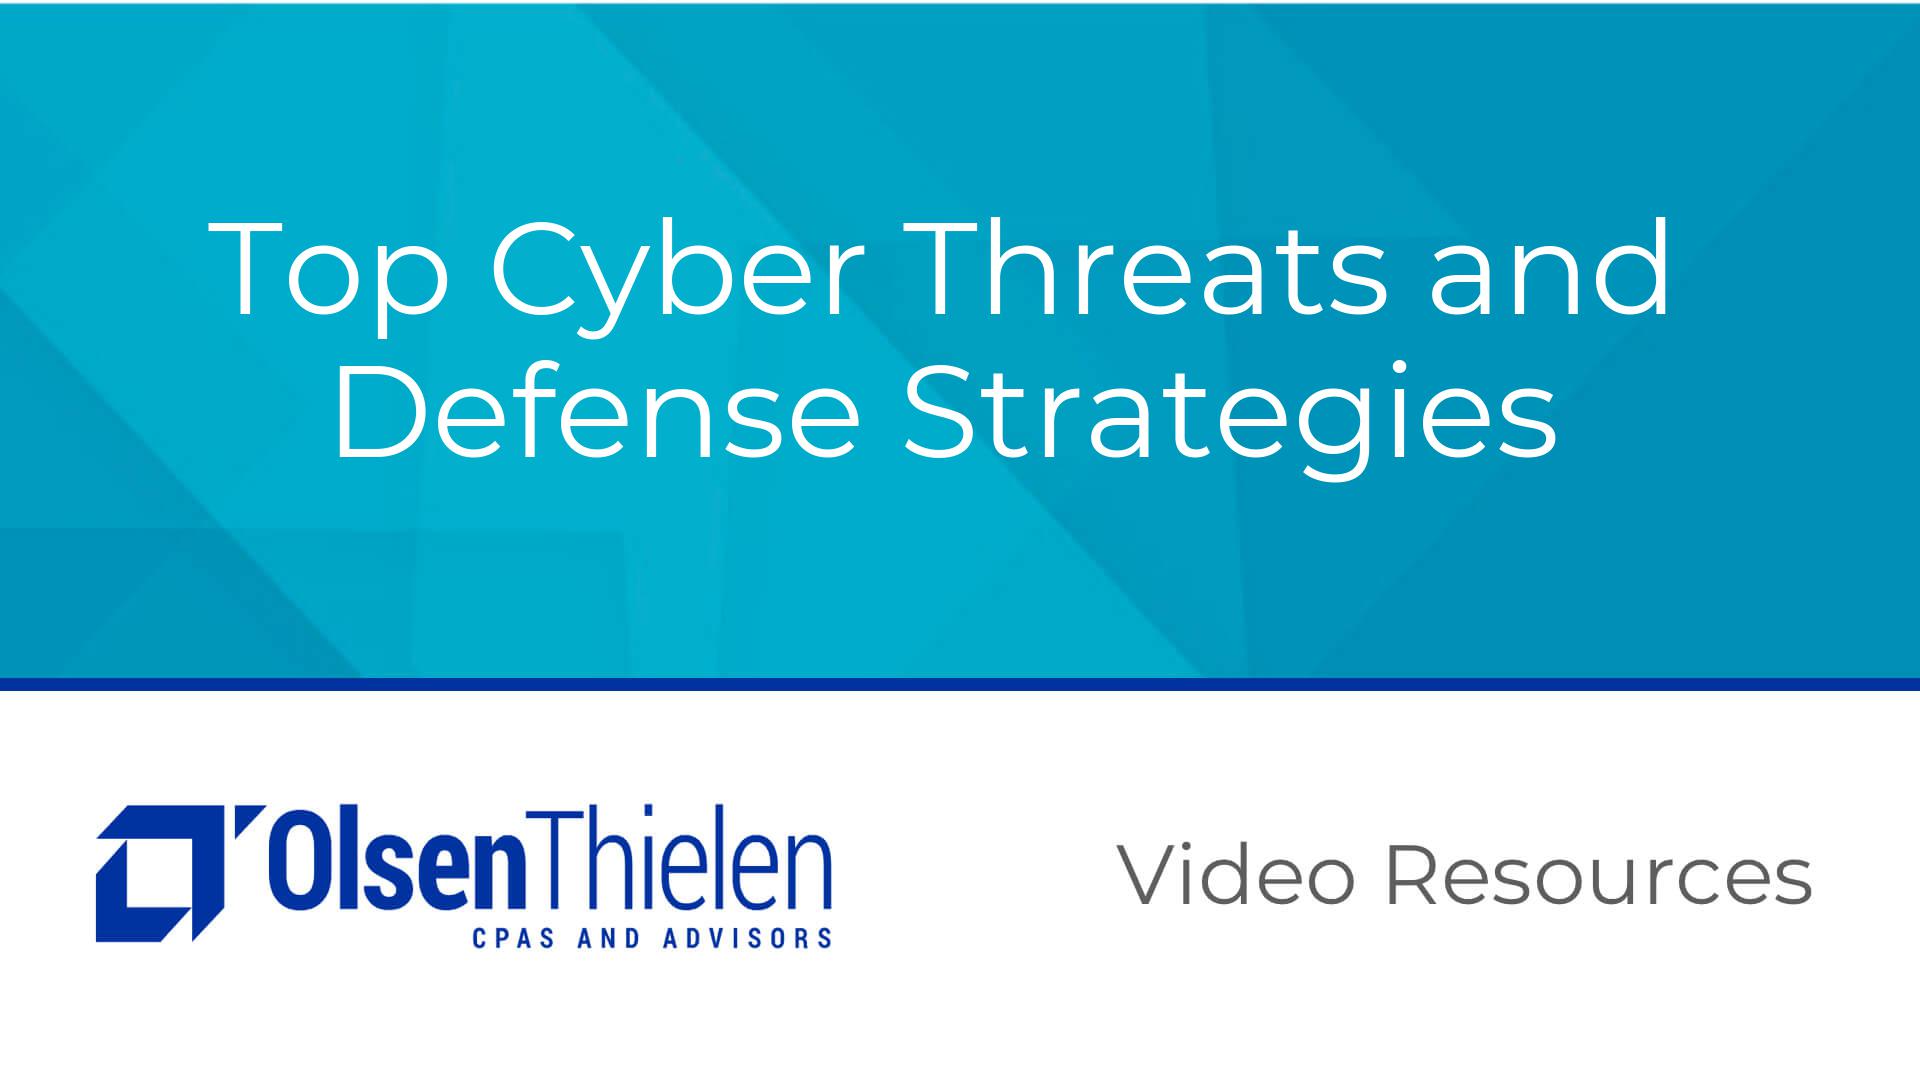 Top Cyber Threats and Defense Strategies